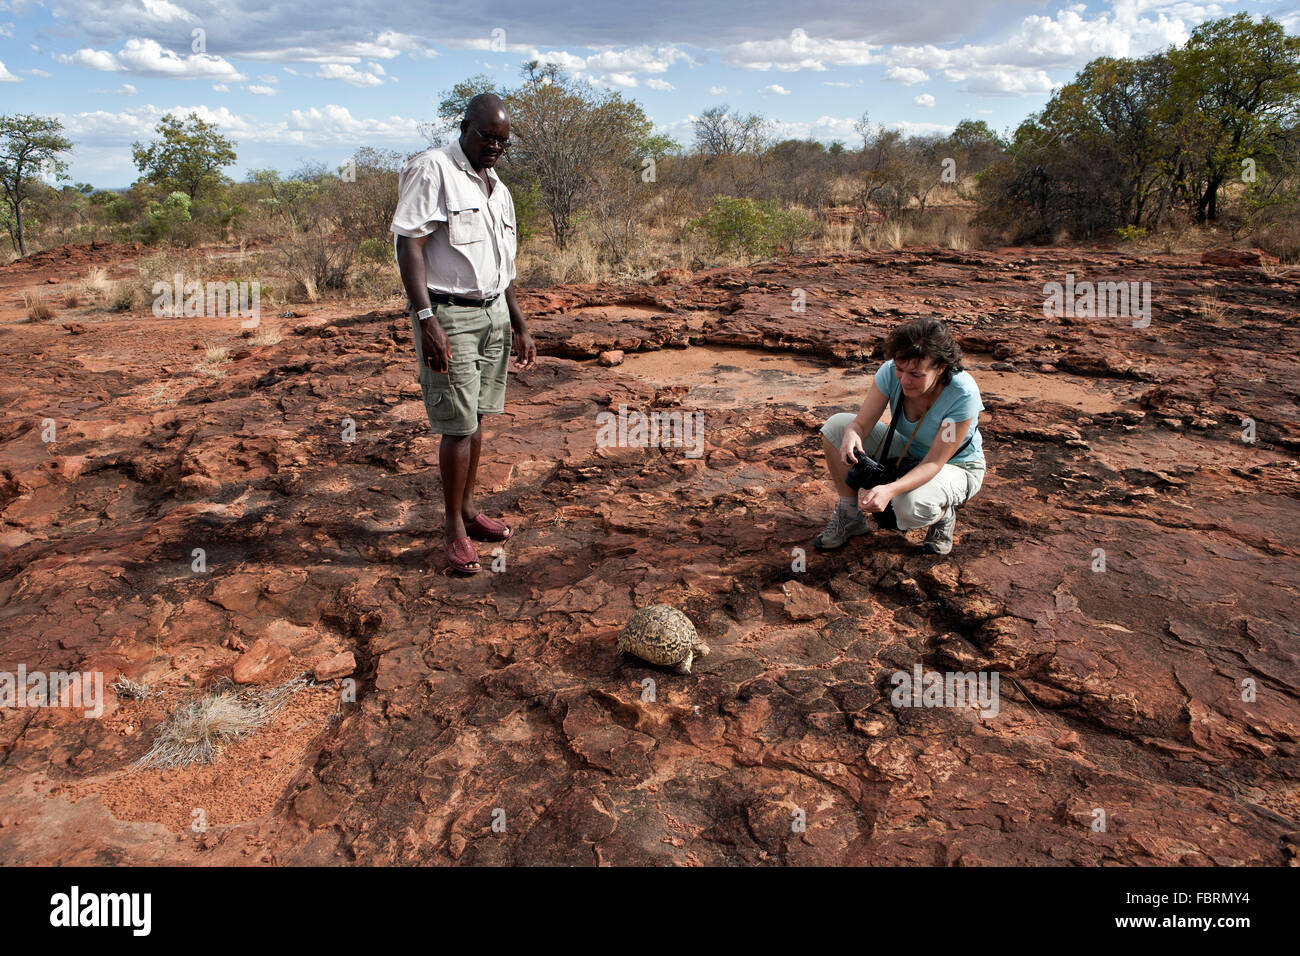 Guide shows a turtle to traveler in Waterberg Plateau Park, Namibia Stock Photo